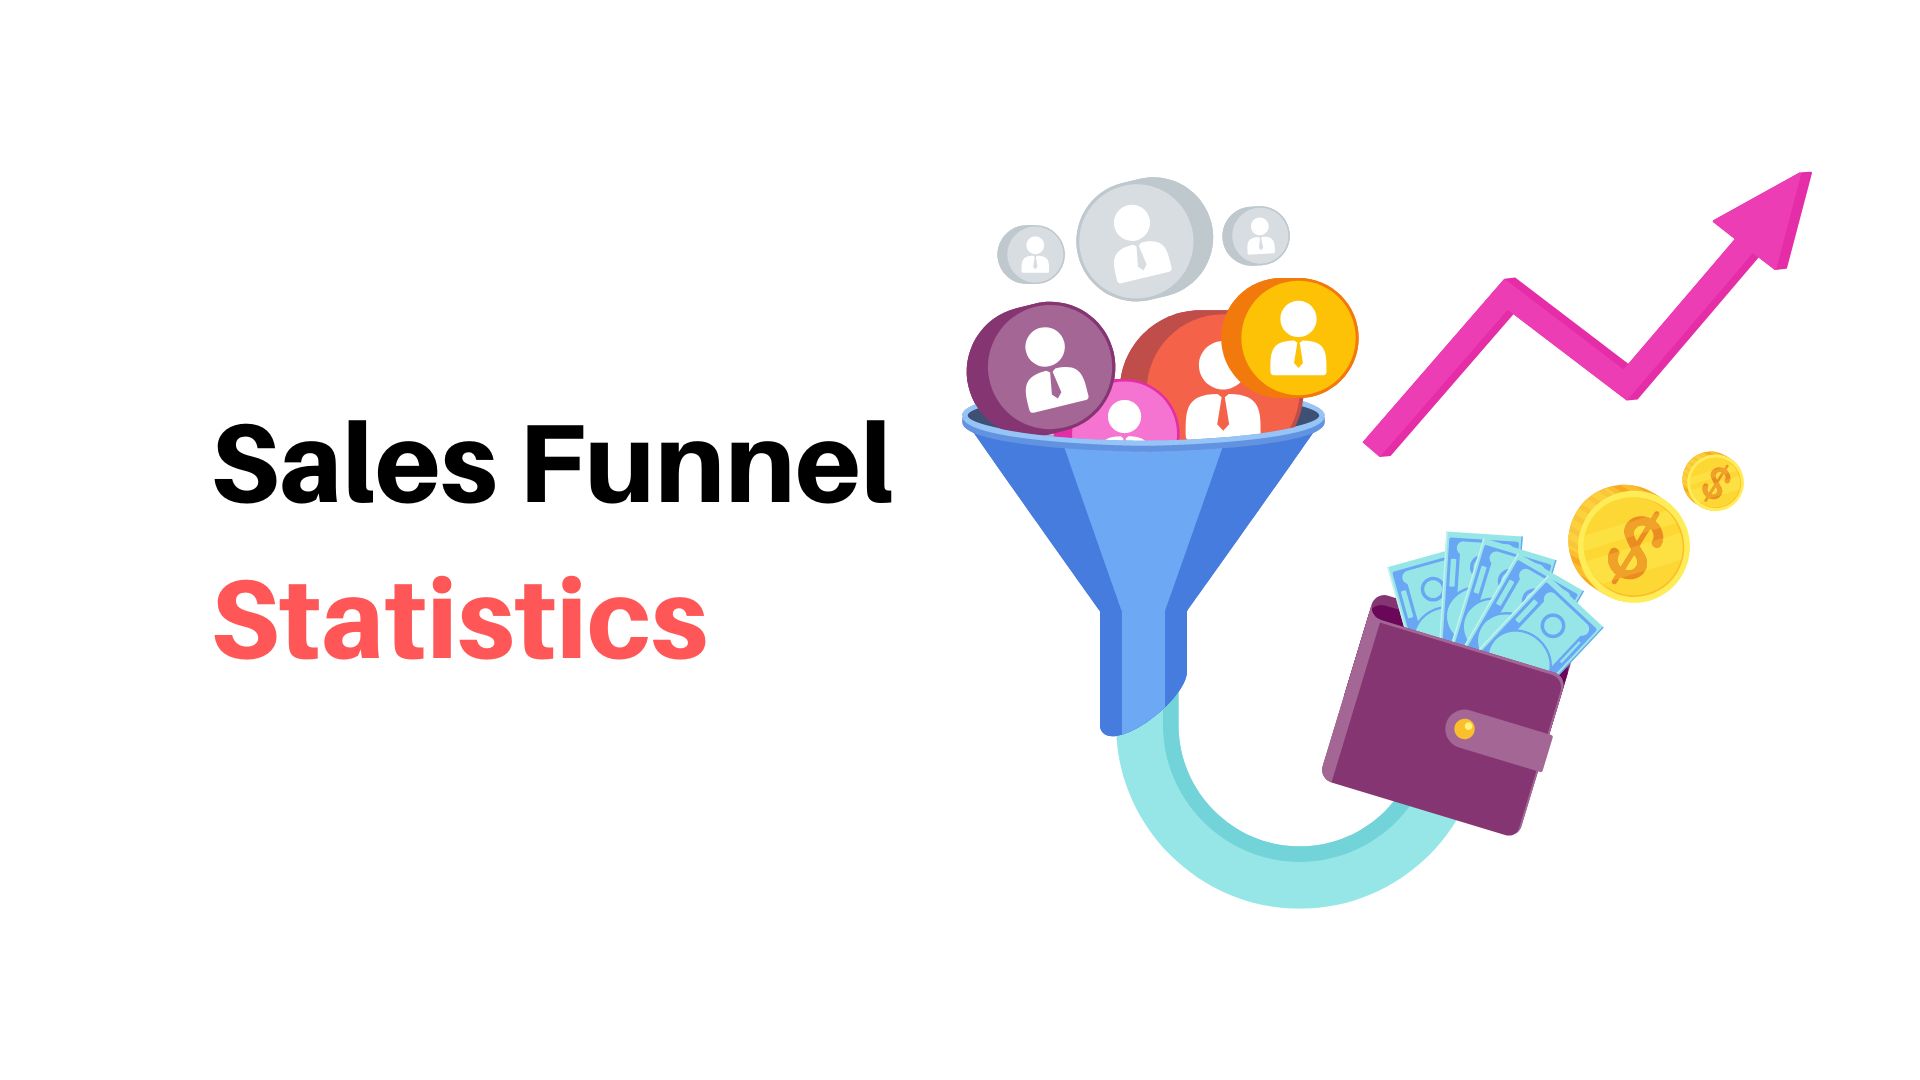 Sales Funnel Statistics By Category, Software, Conversion Rates, Experience, Industries, Consumers, Landing Pages and Lead Nurturing